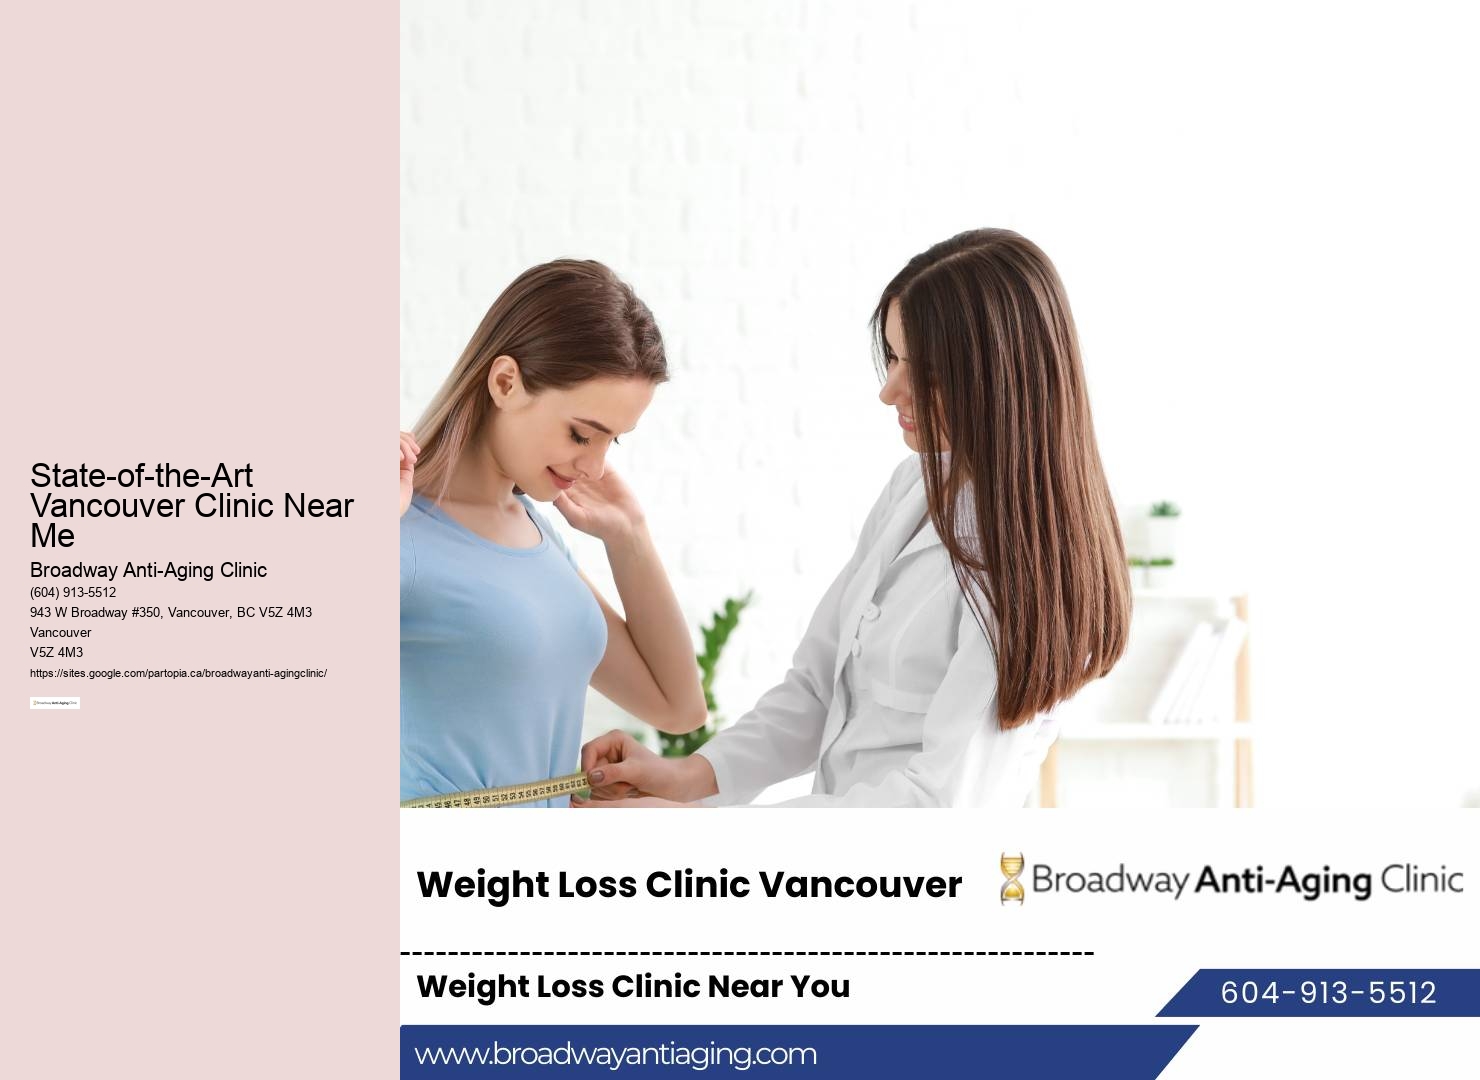 State-of-the-Art Vancouver Clinic Near Me